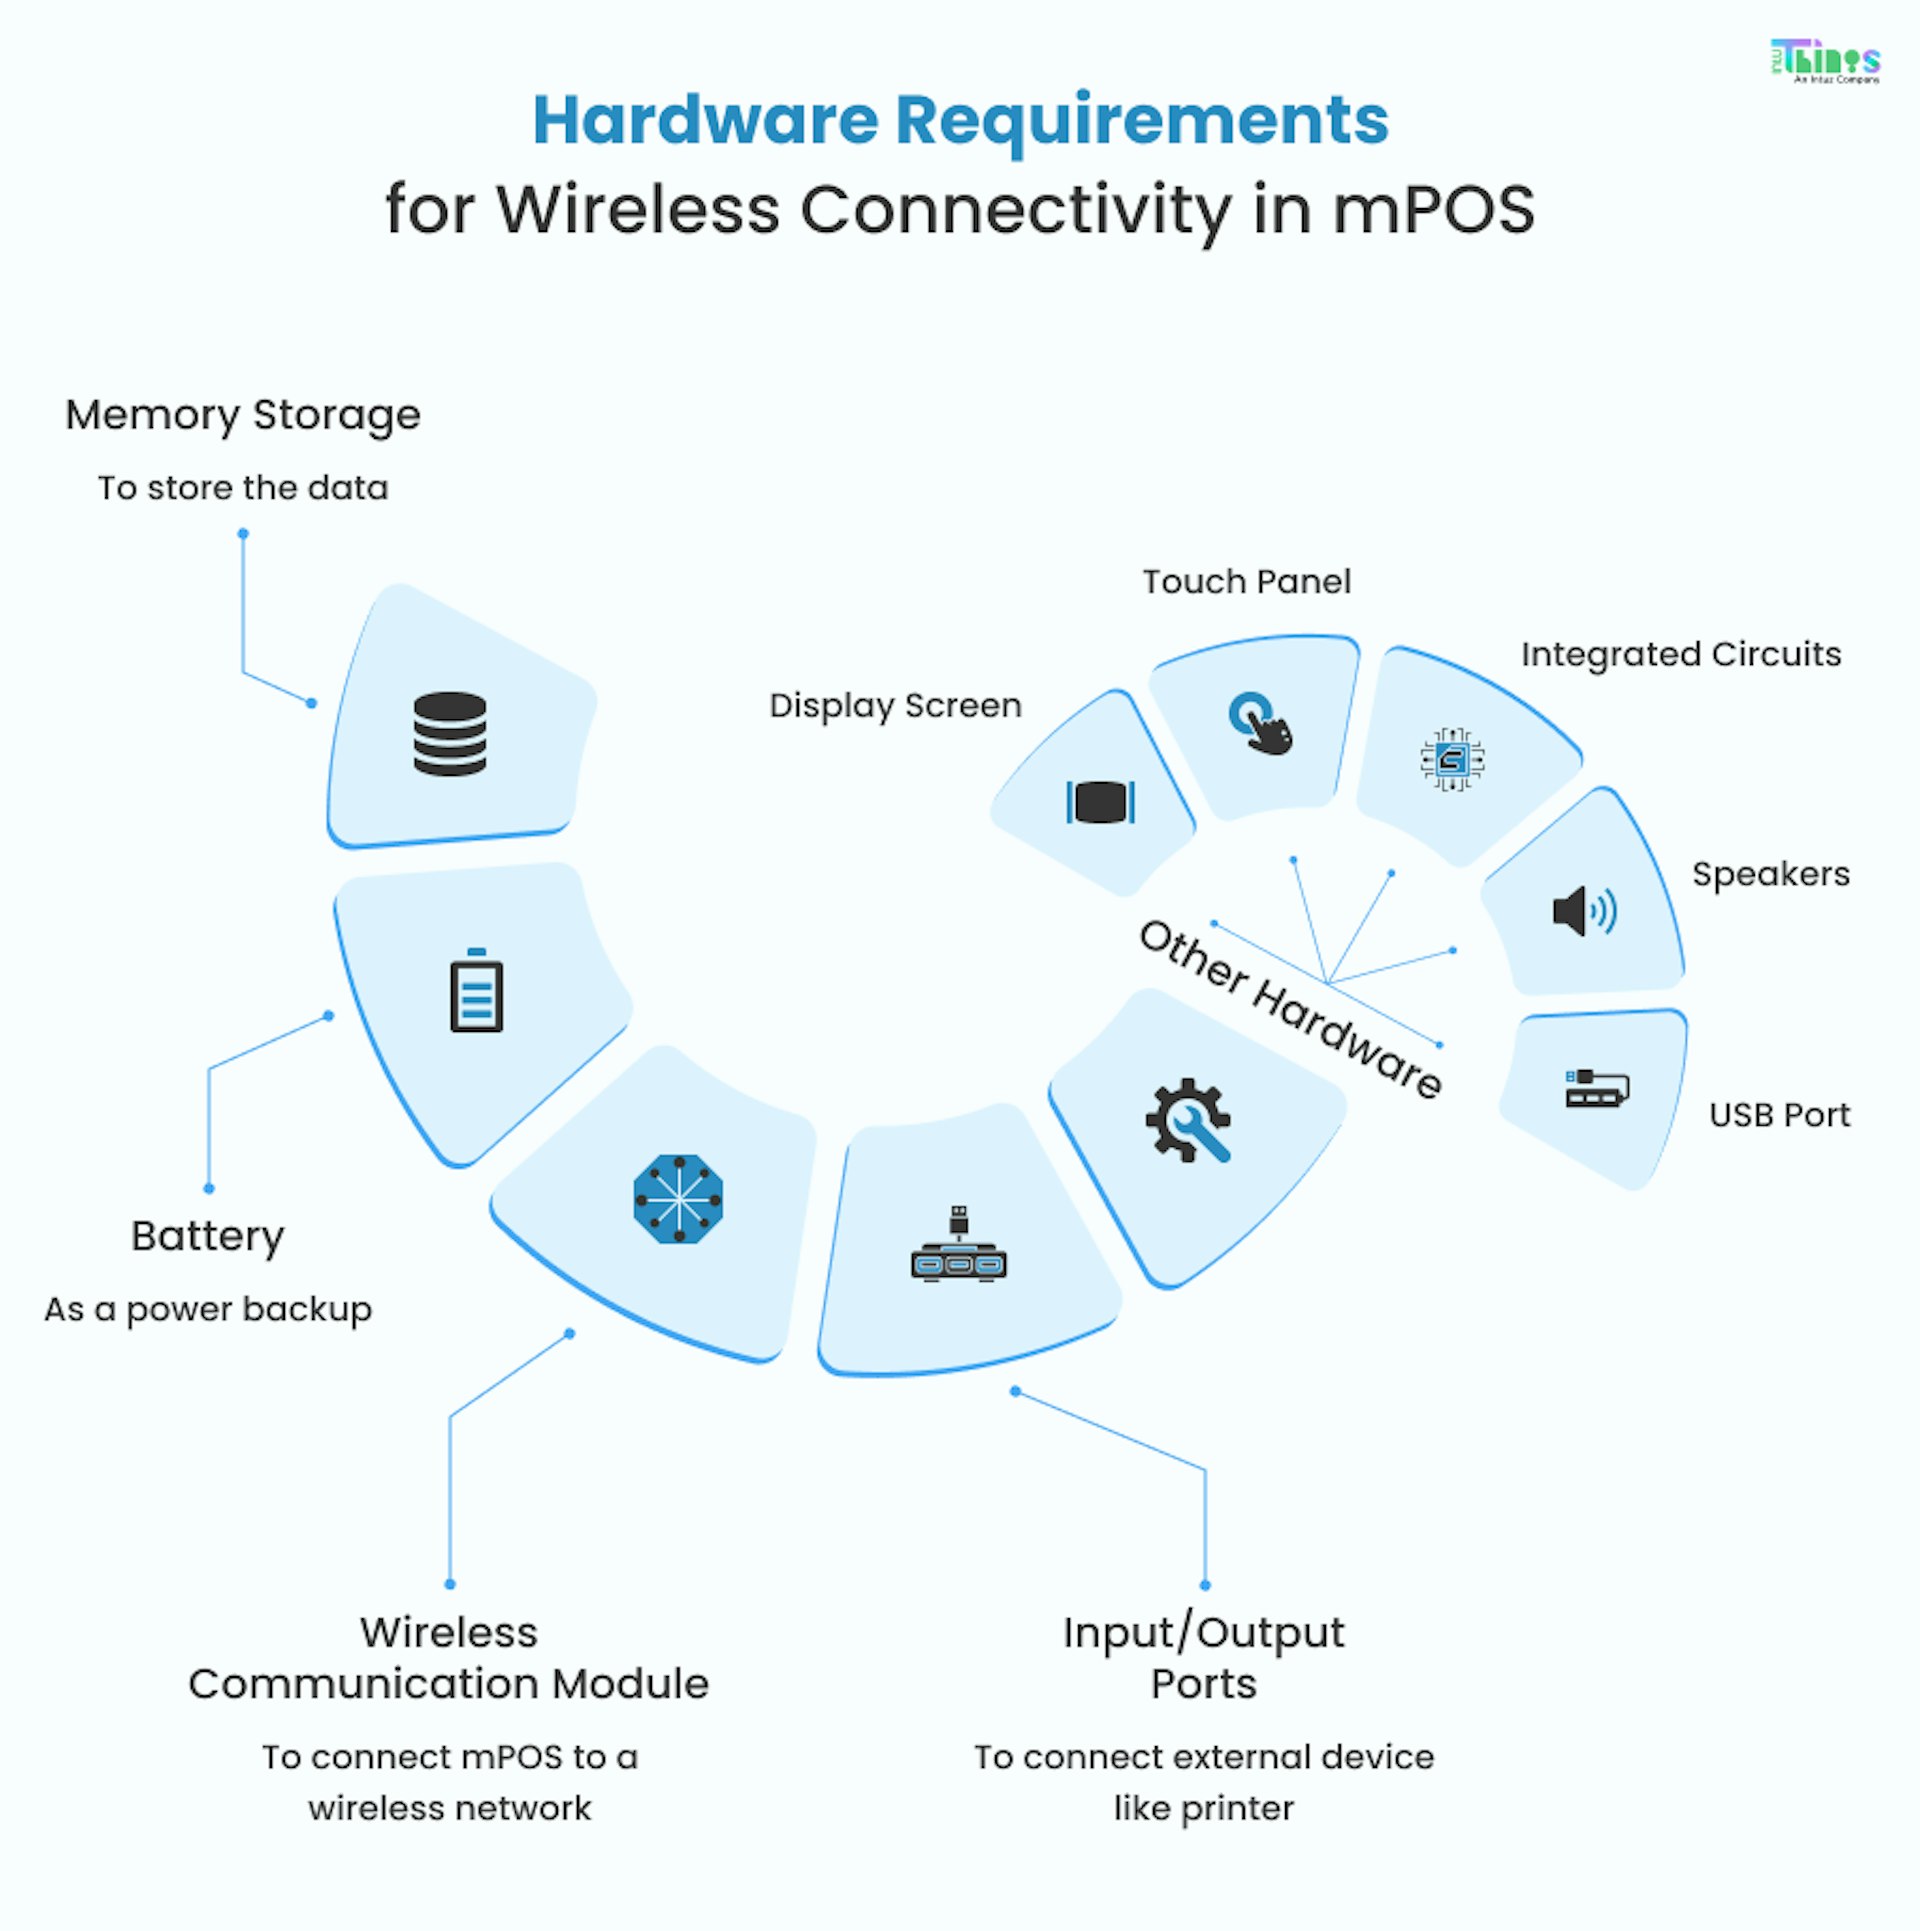 Hardware requirements for wireless connectivity in mPOS